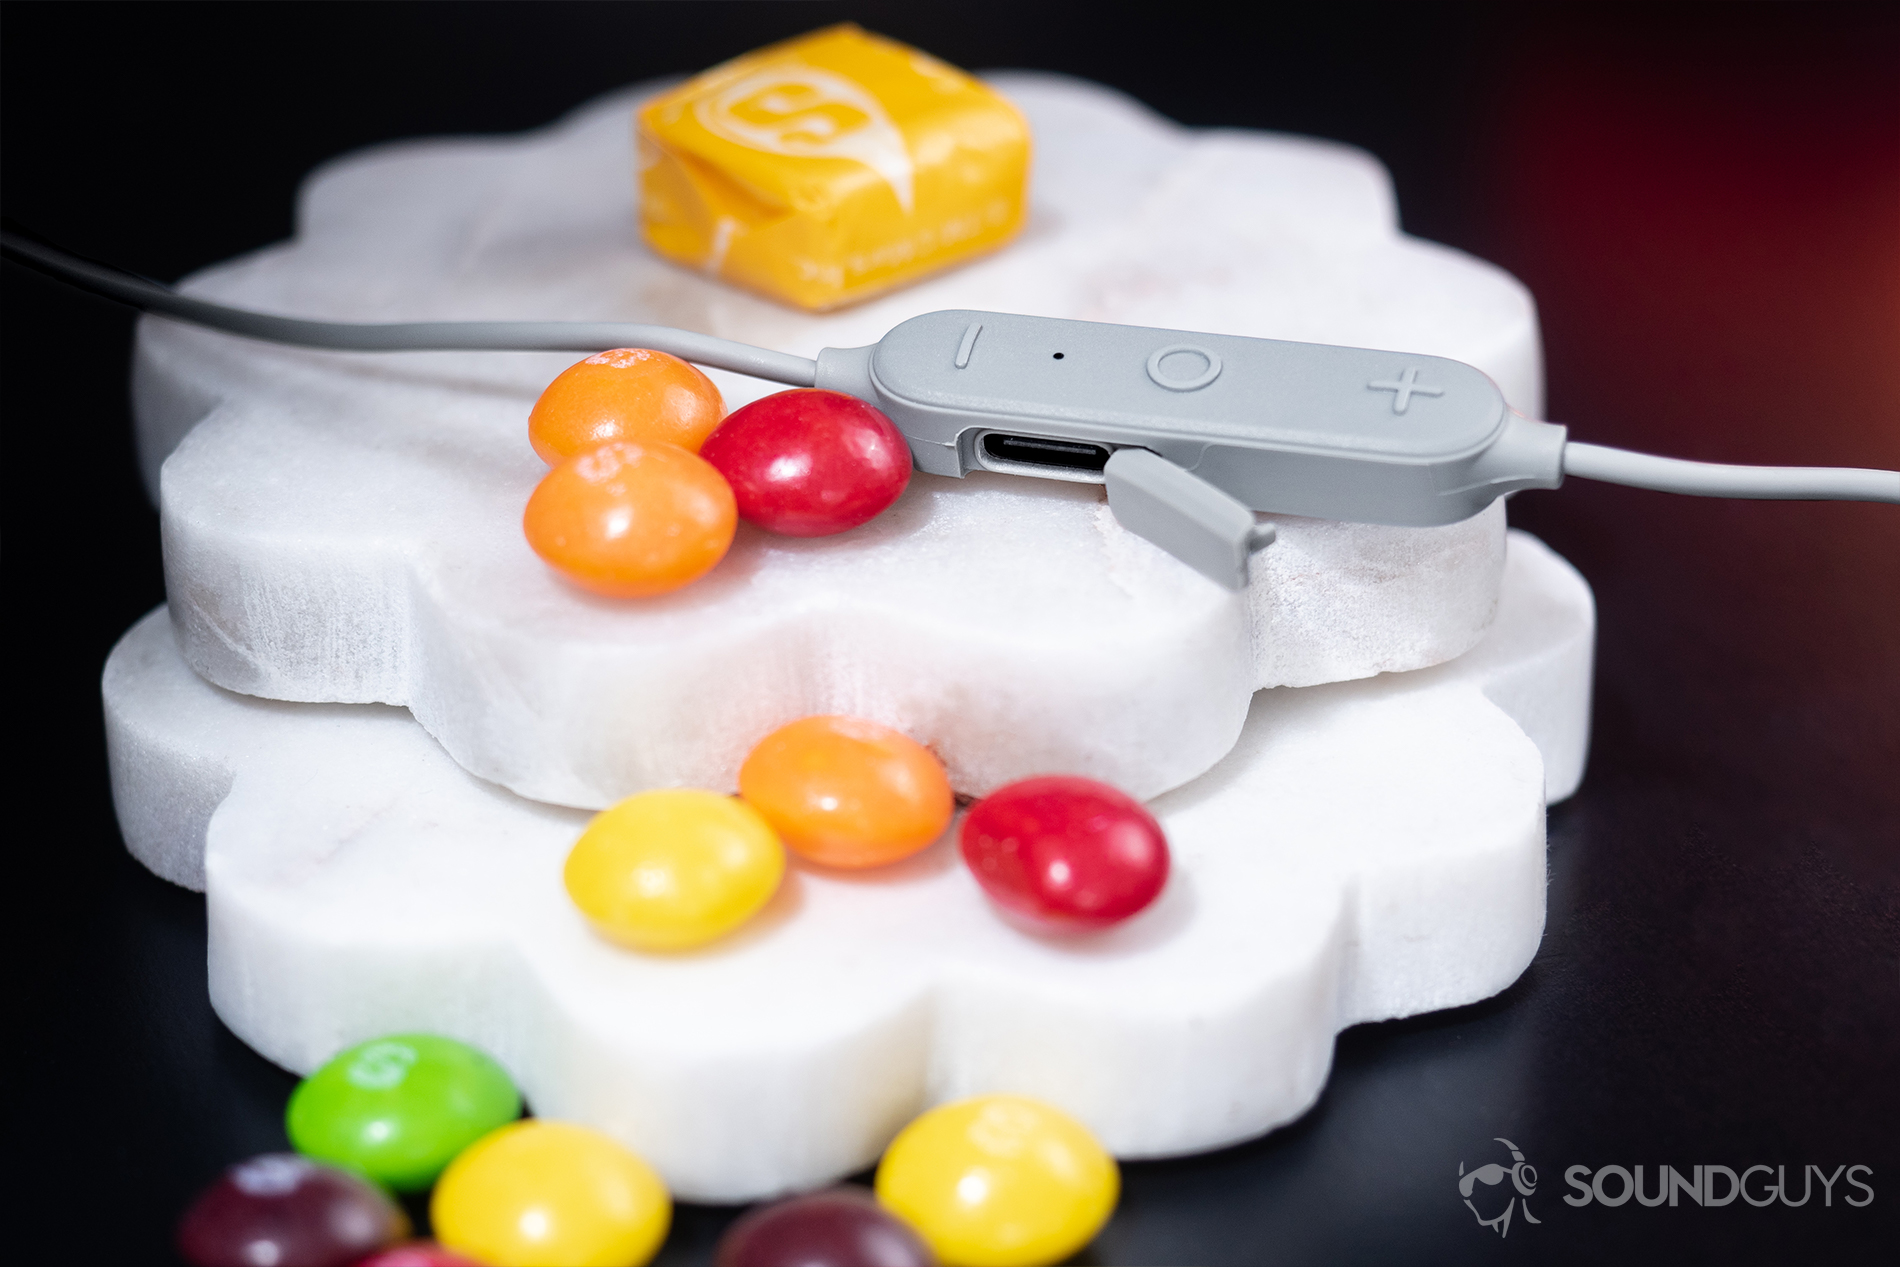 Aukey EP-B80: A close-up of the USB-C input with the module resting on unevenly stacked white coasters and Skittles layered atop.